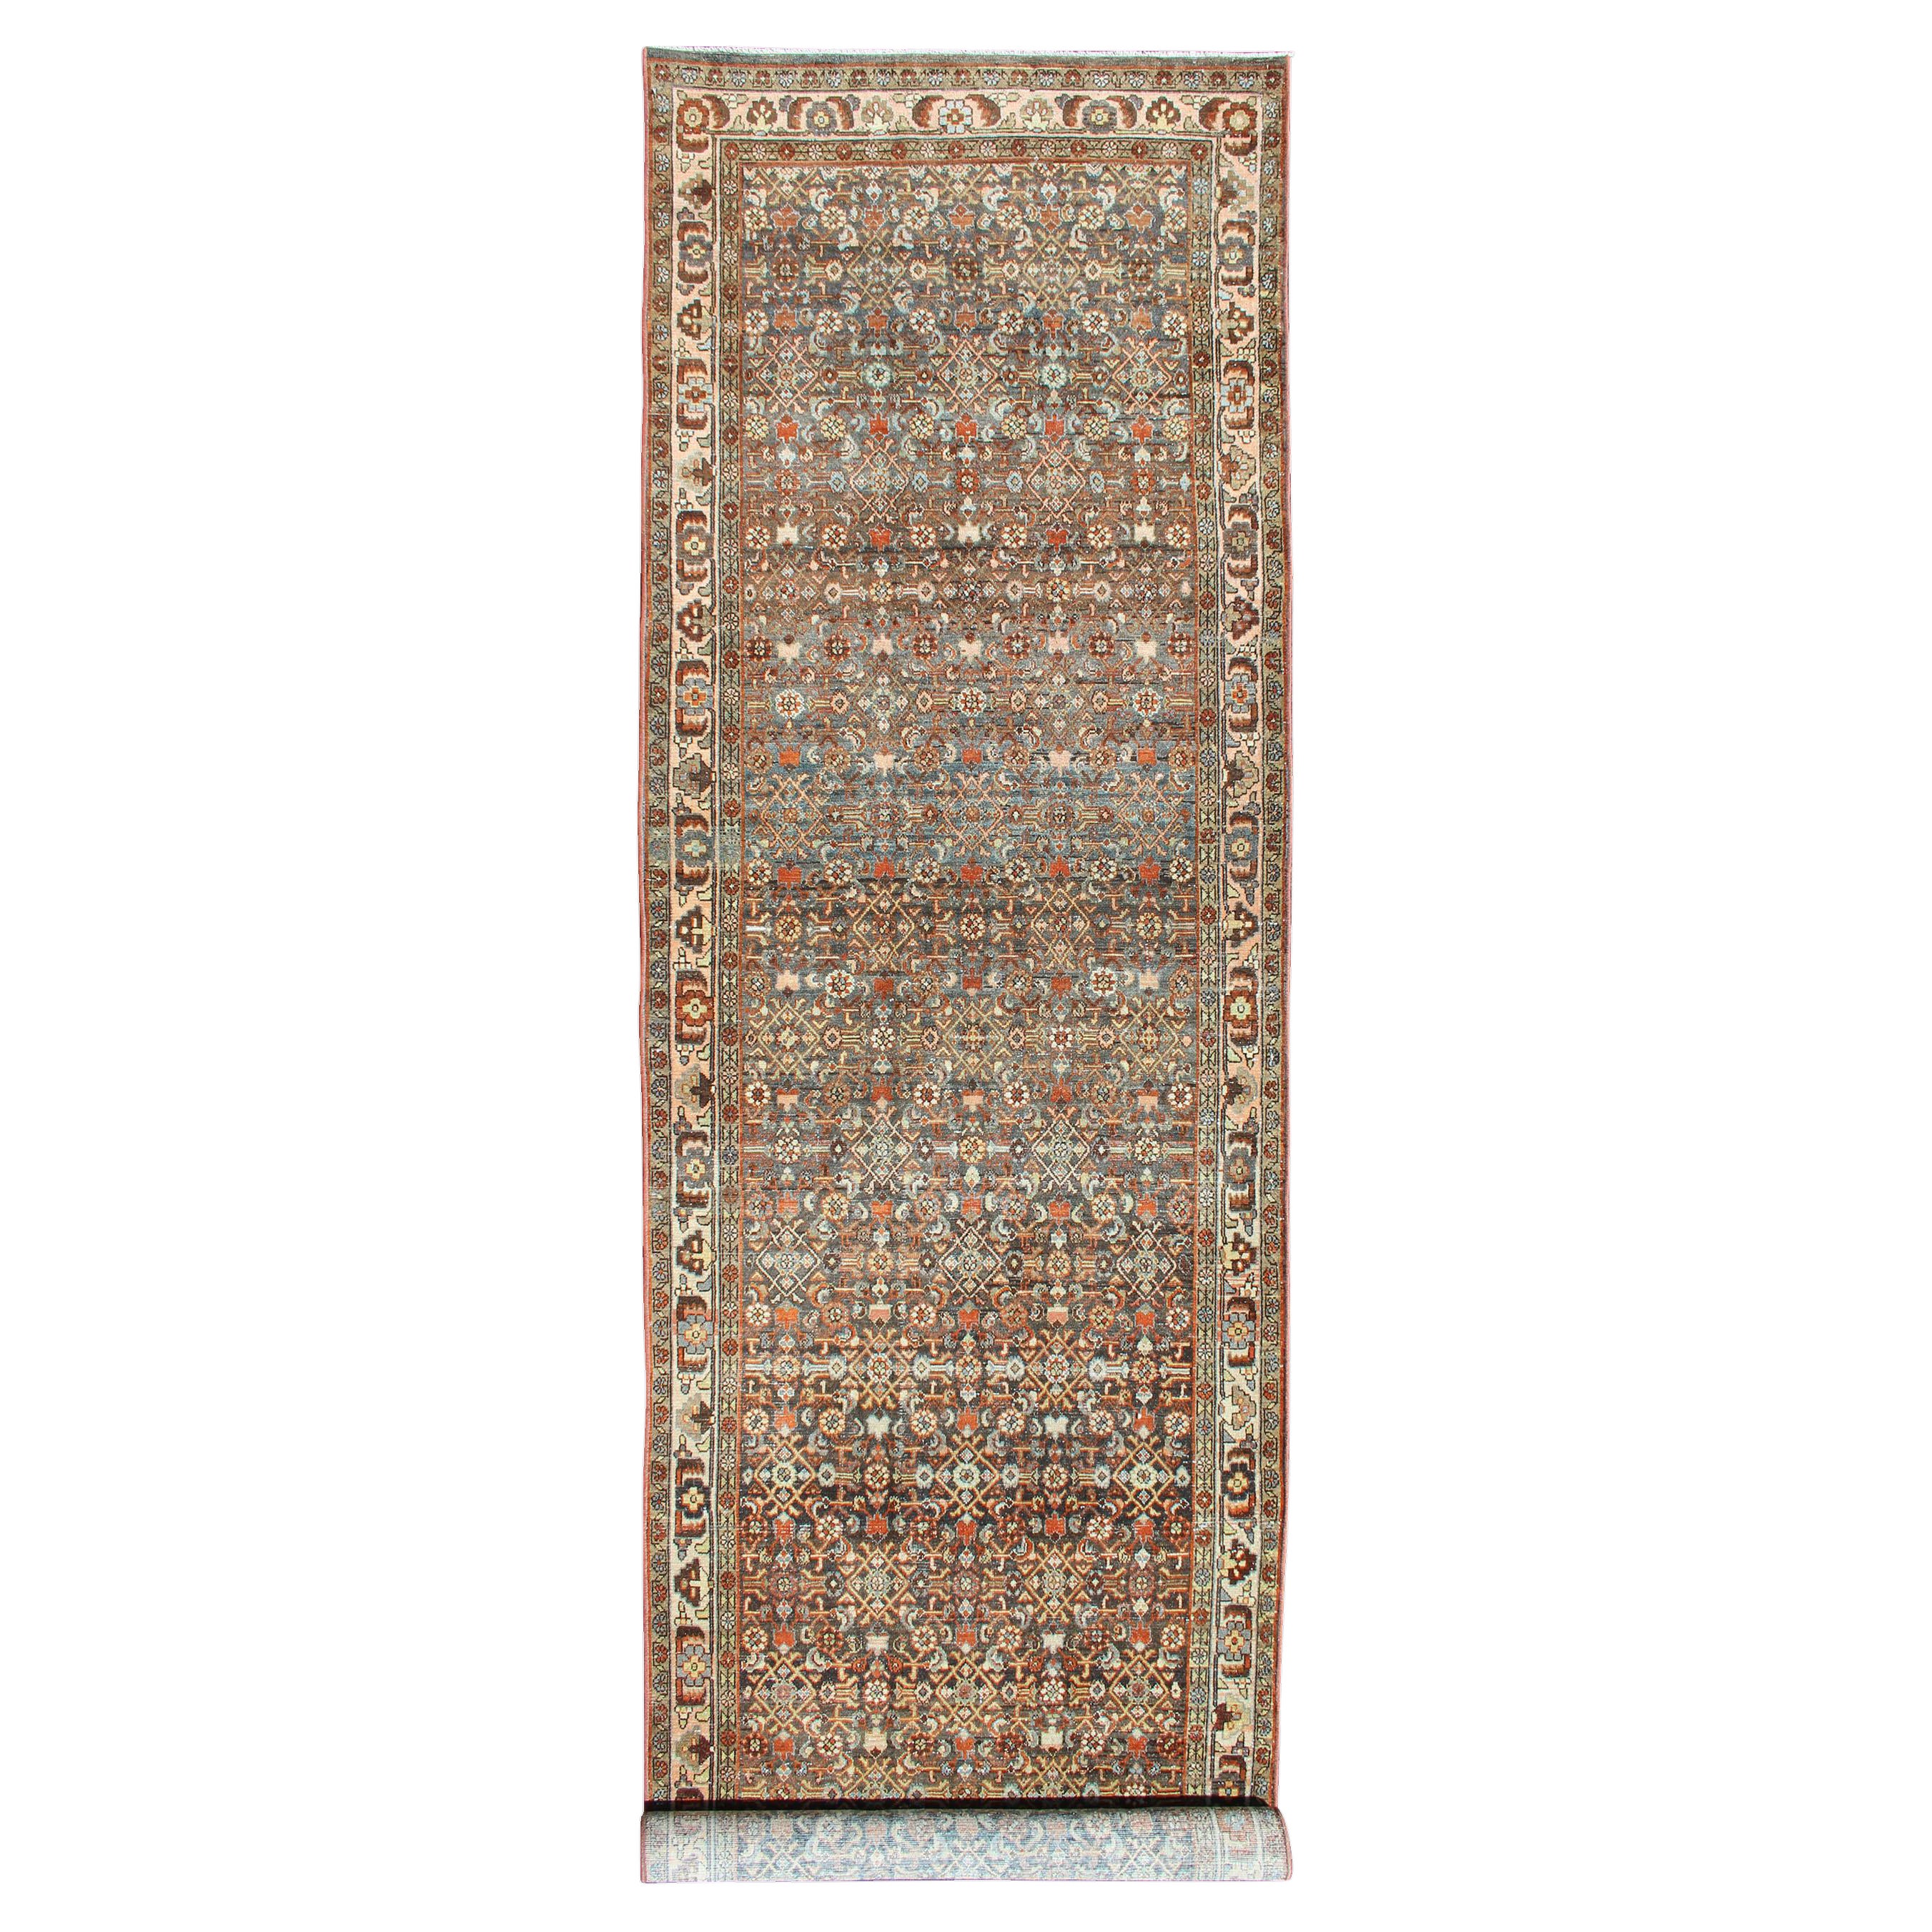 Antique Persian Malayer Long Runner with All-Over Geometric Herati Design